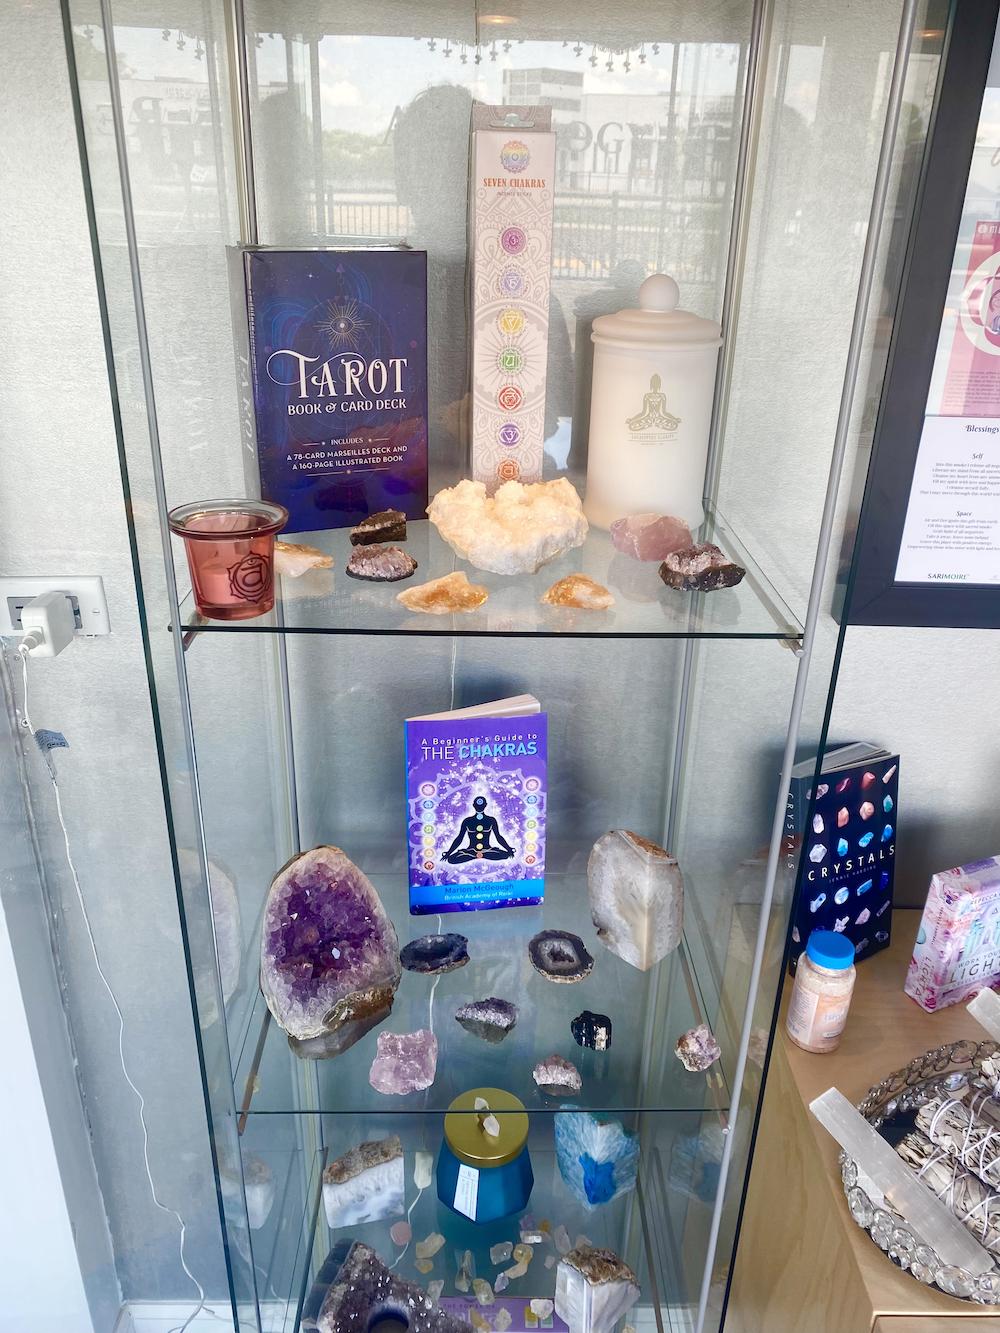 Crystals and Gem Stones